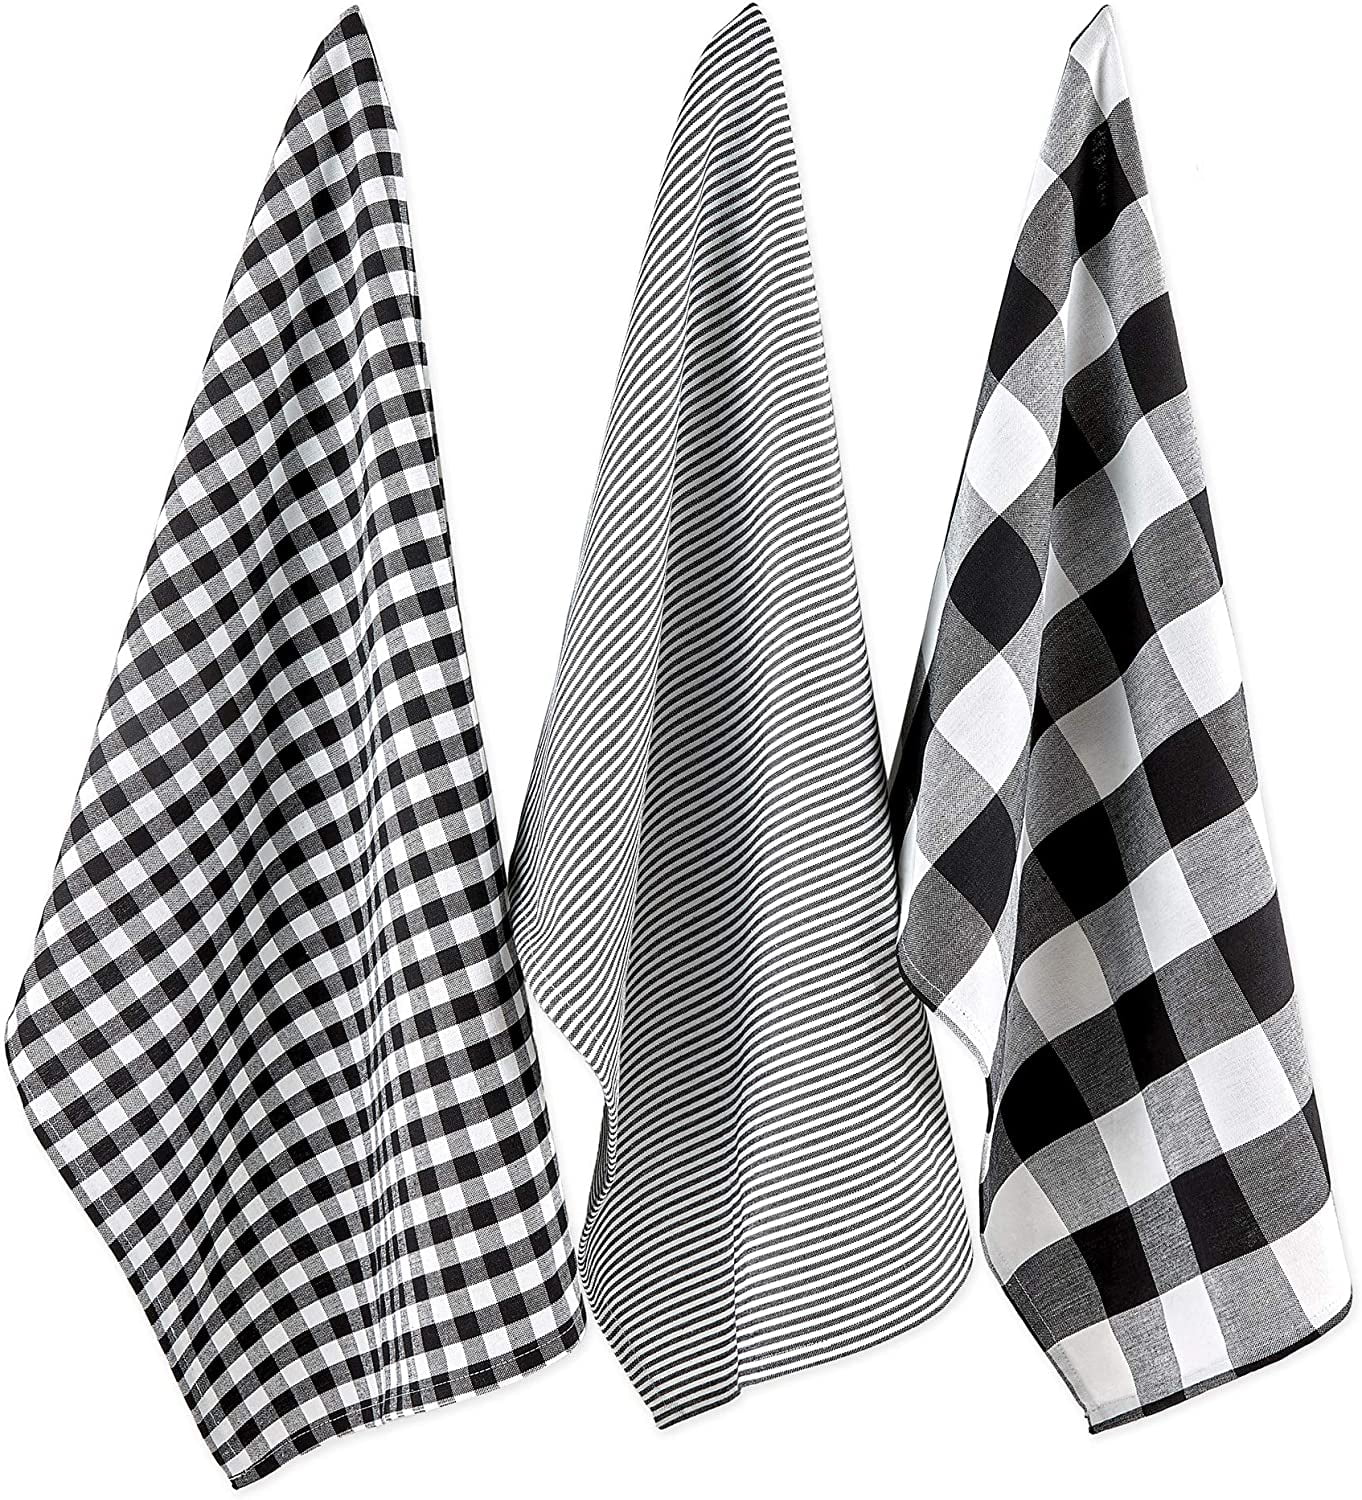 DII Gingham Check Table Top & Kitchen Collection Classic Design 100% Cotton Napkin Set Machine Washable for Family Dinners Black/White 4 Piece,5283 Special Occasions and Everyday Use 